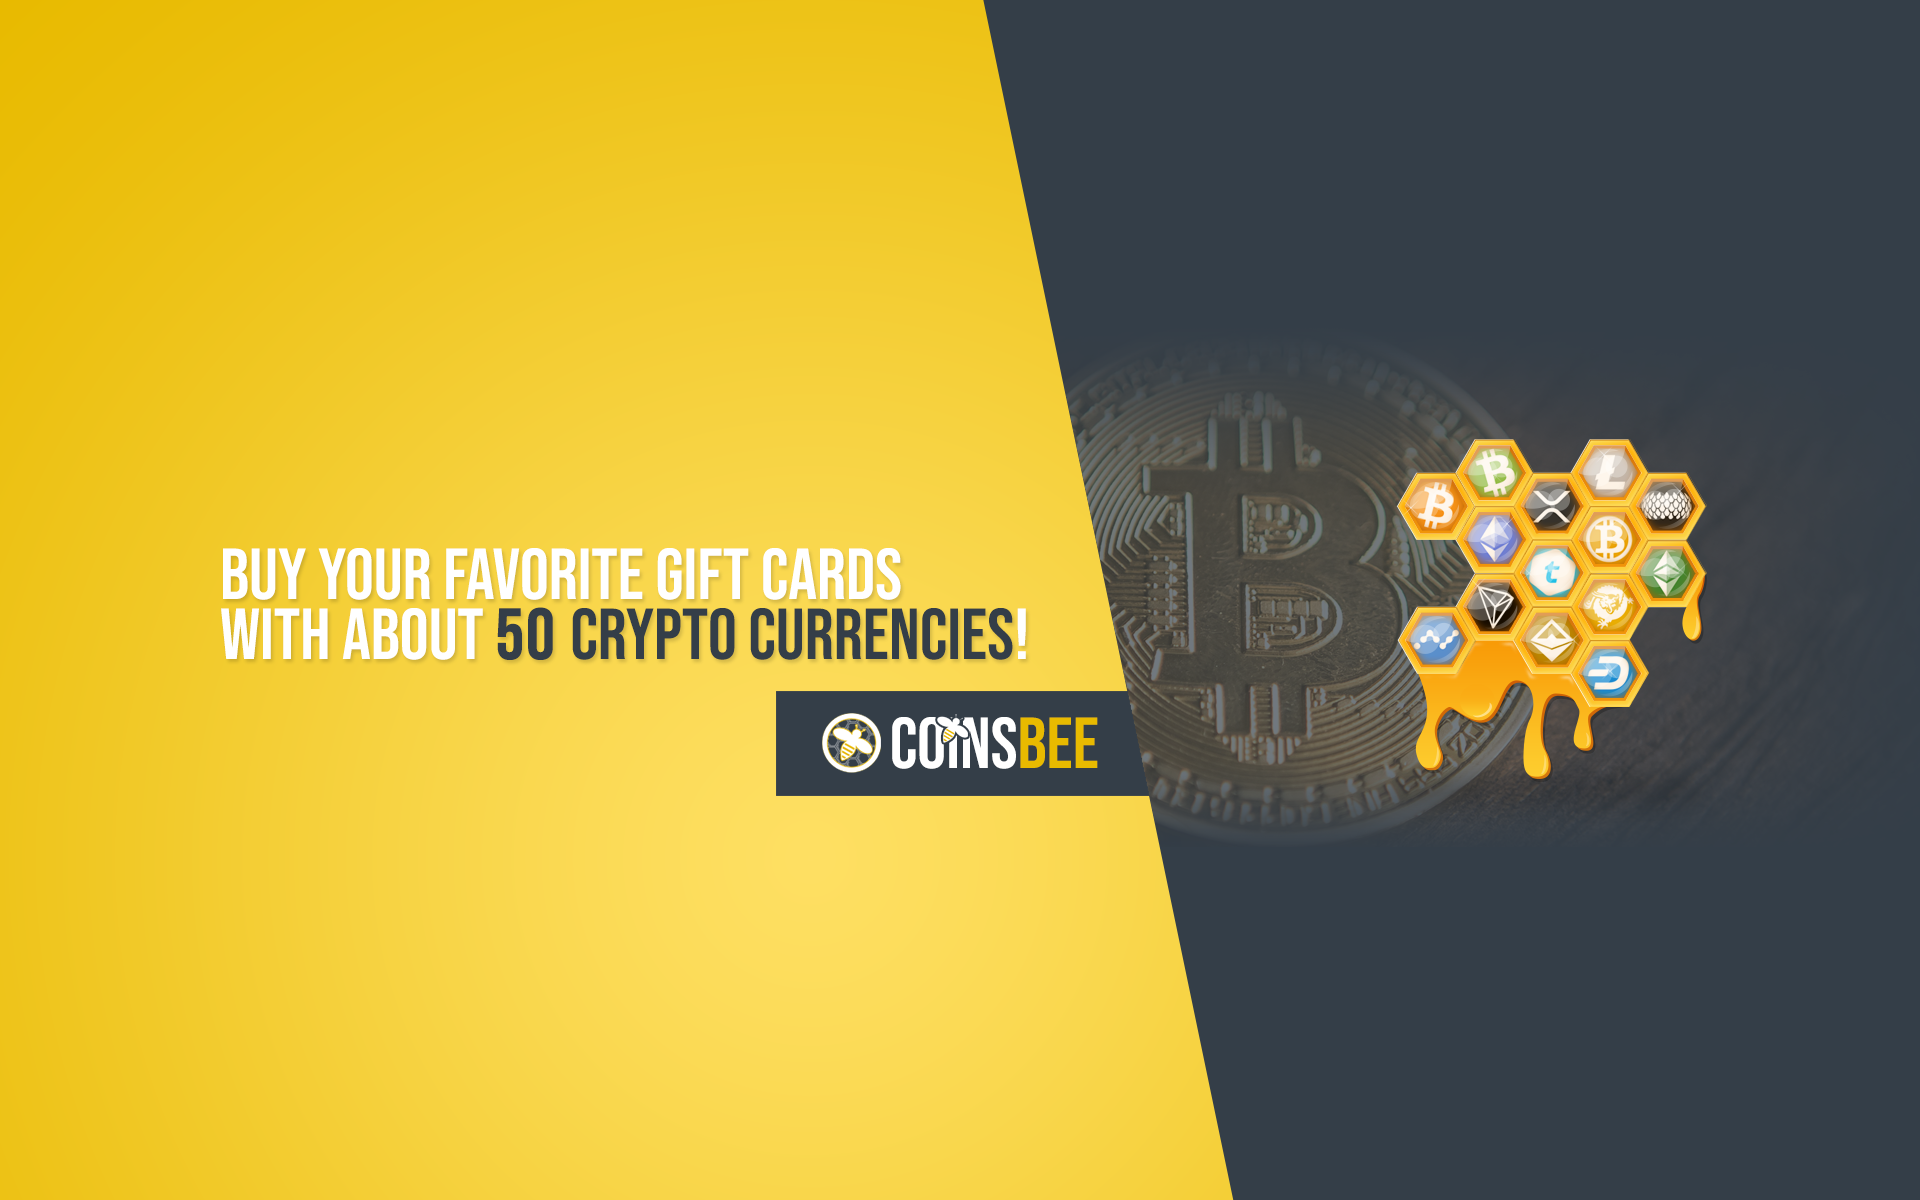 How To Buy Gift Cards Or Top Up Your Mobile With Crypto And CoinsBee